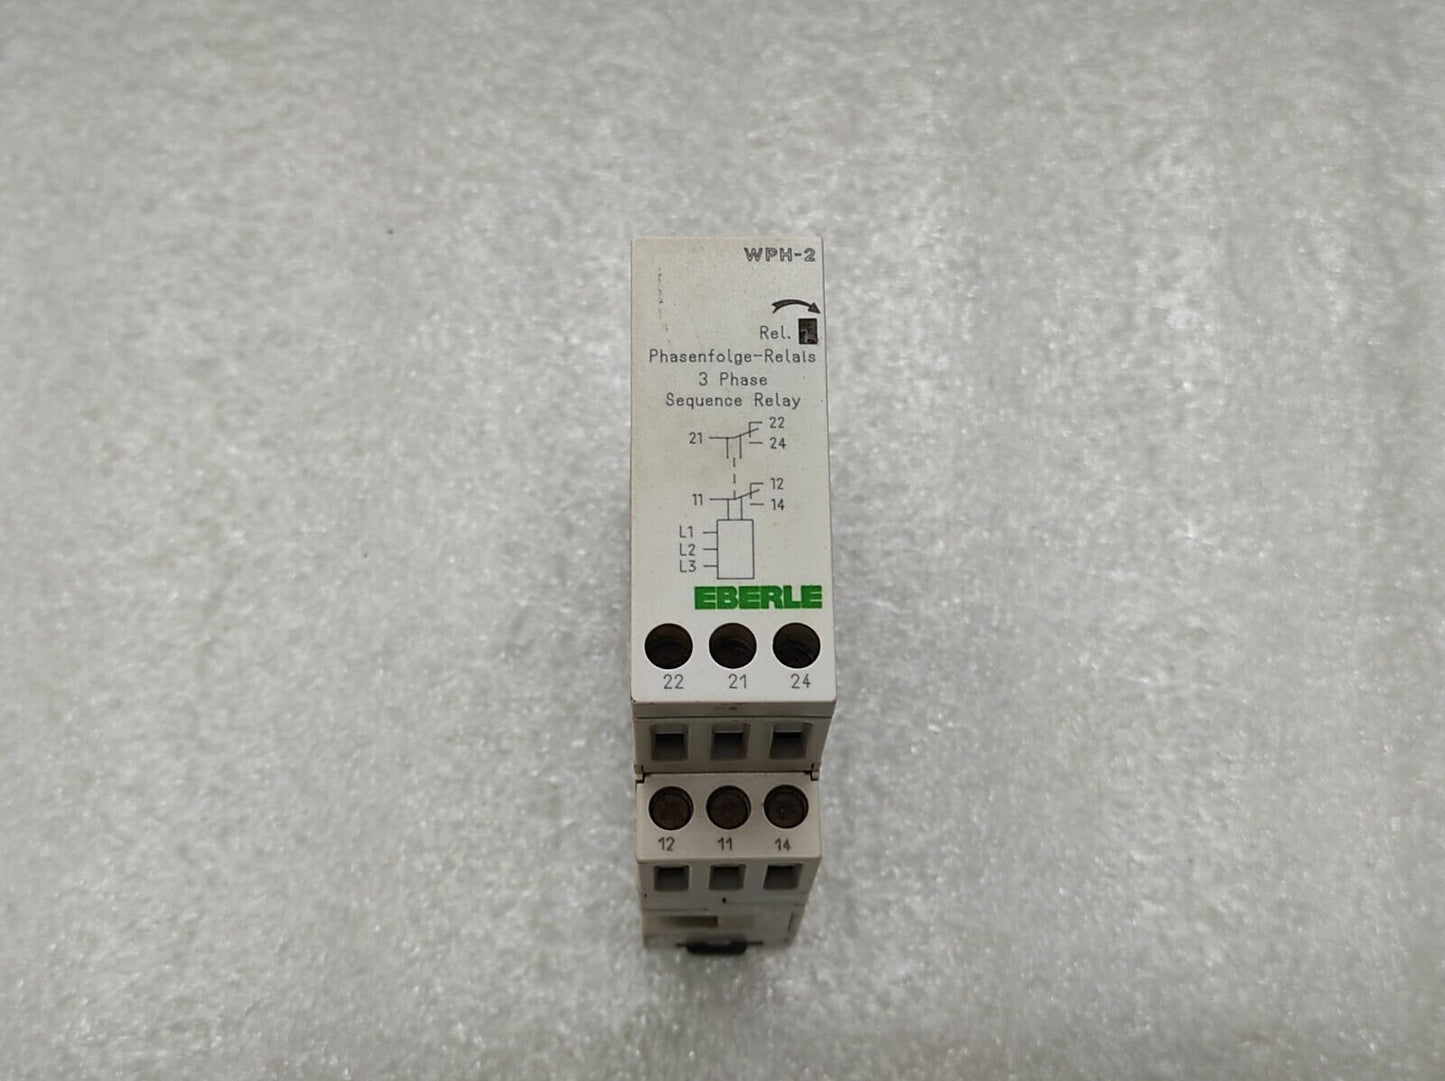 EBERLE WPH-2 3-PHASE SEQUENCE RELAY 080023162300